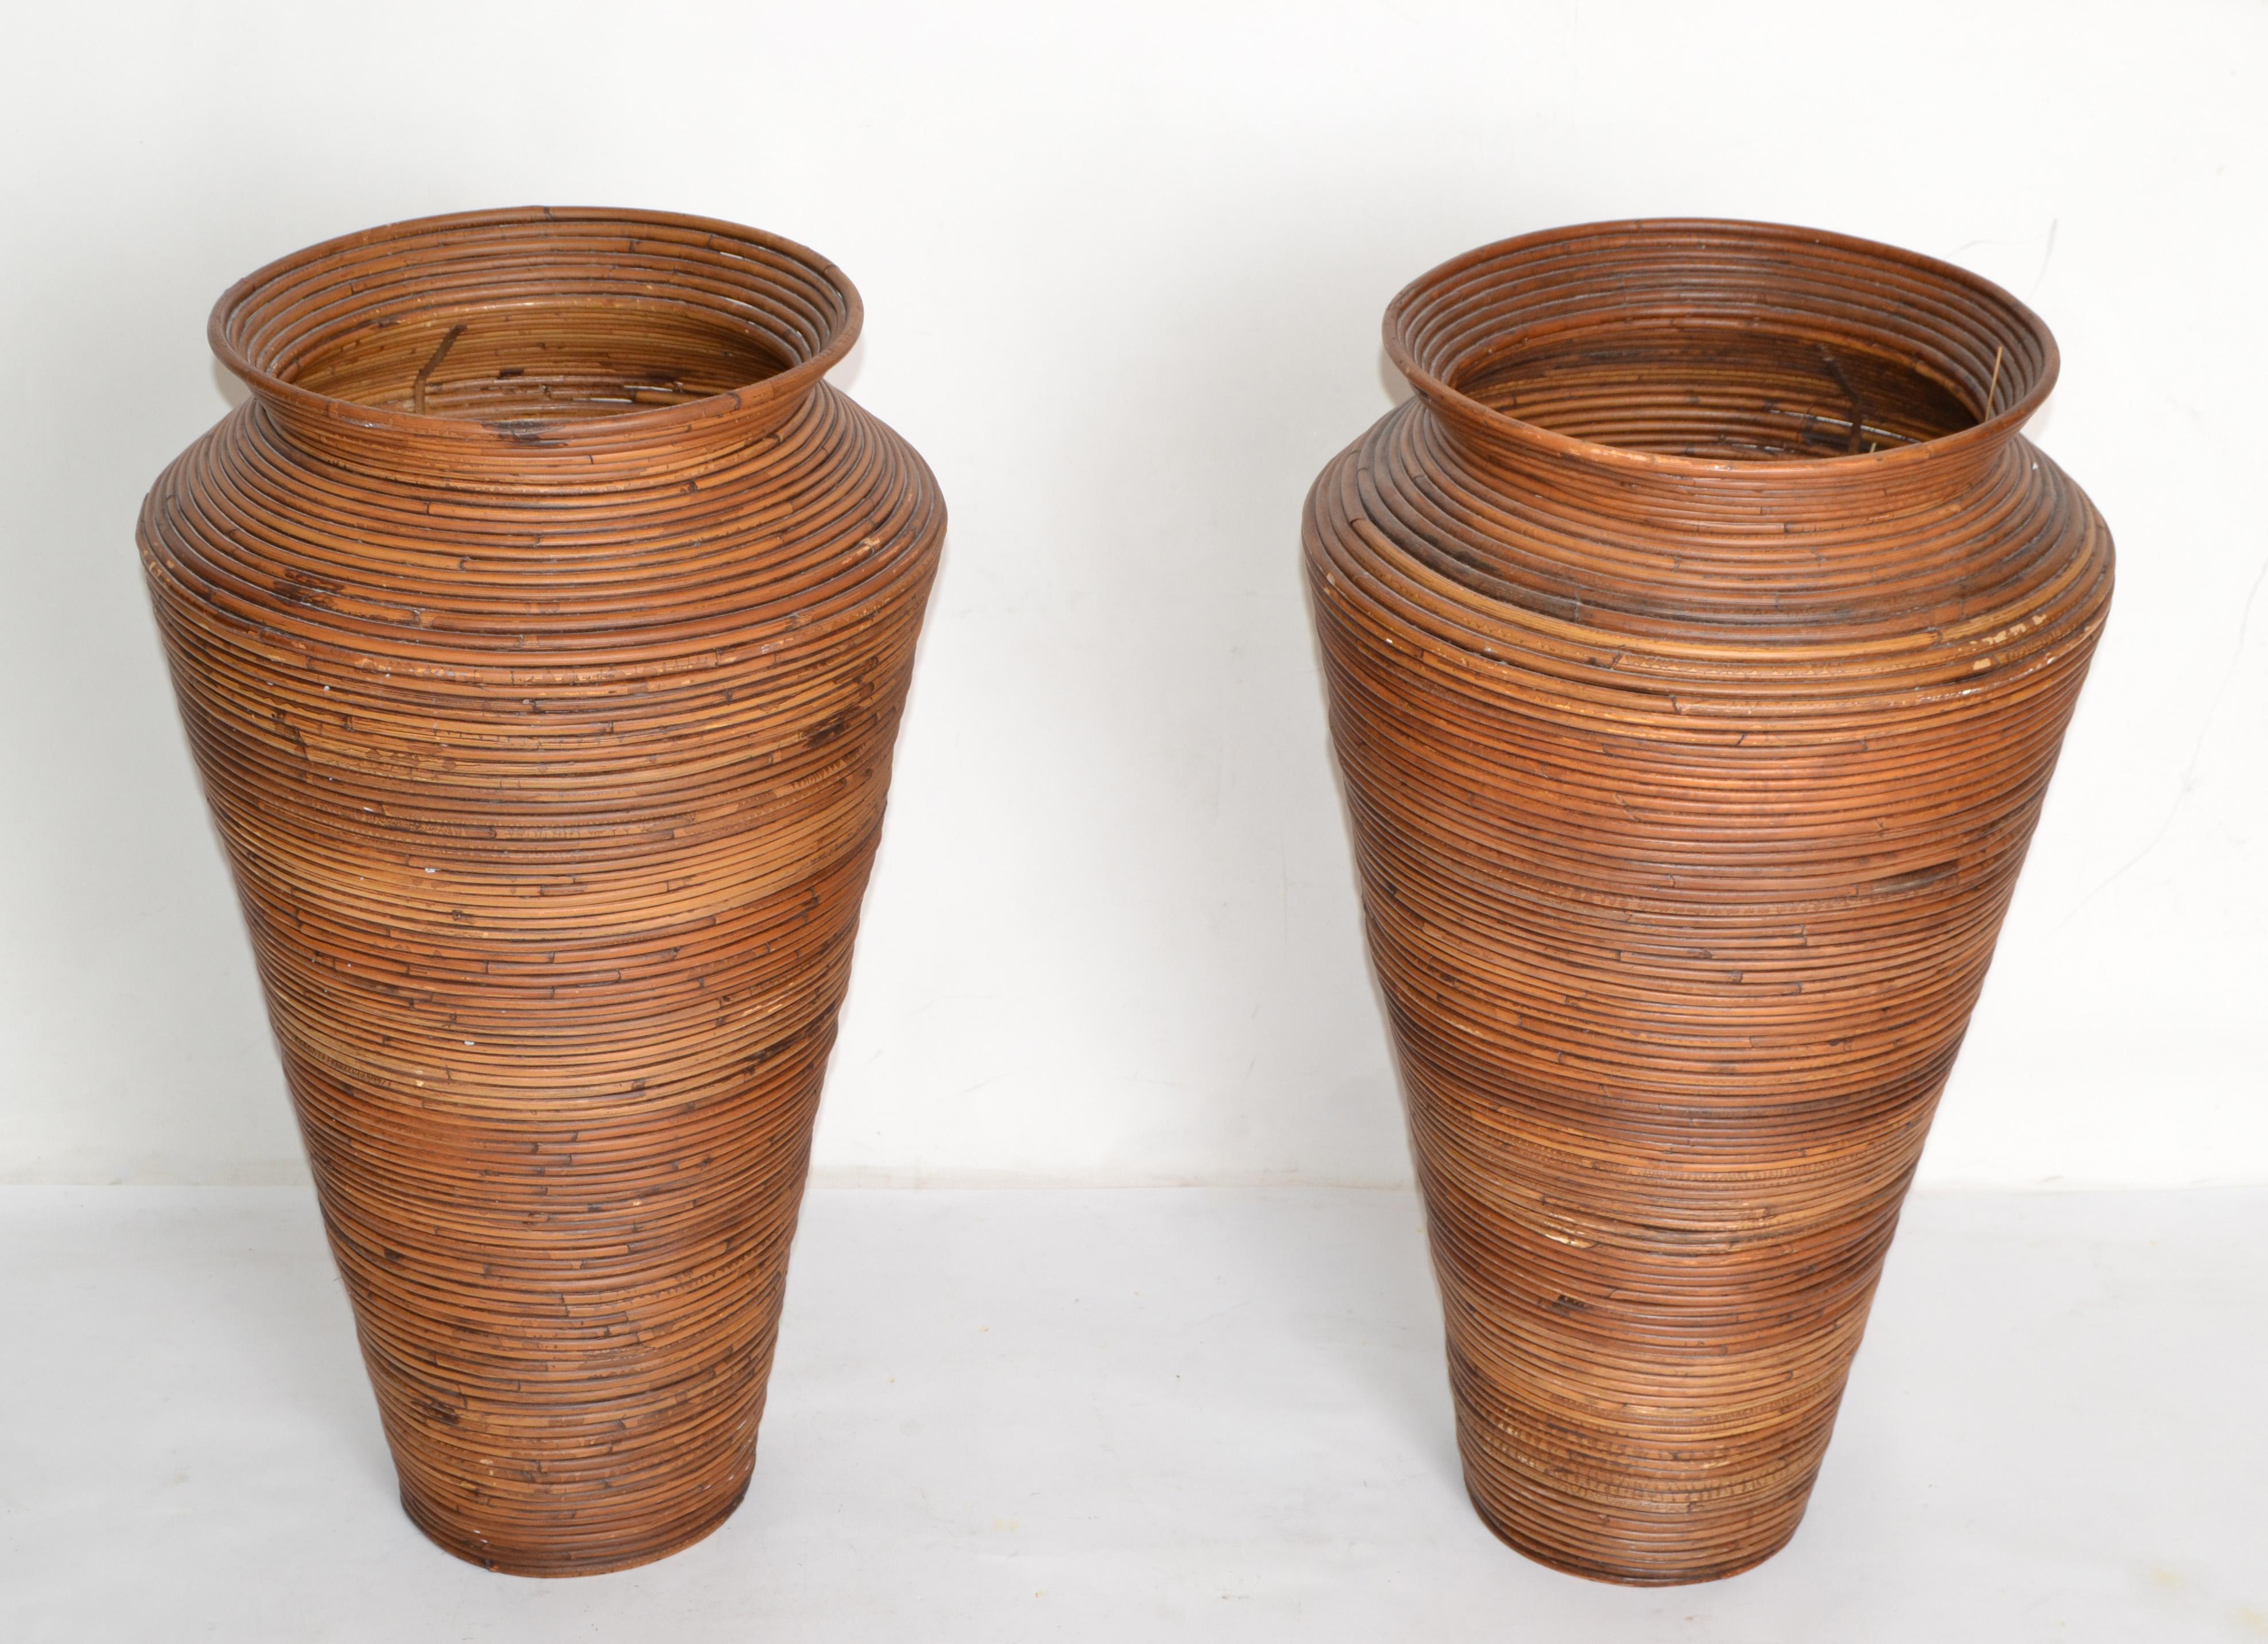 A Pair of Boho Chic Mid-Century Modern handcrafted tall boho chic pencil reed bamboo floor vase in cone shape.
Made in America.
Great addition for Your Tropical Sunroom.